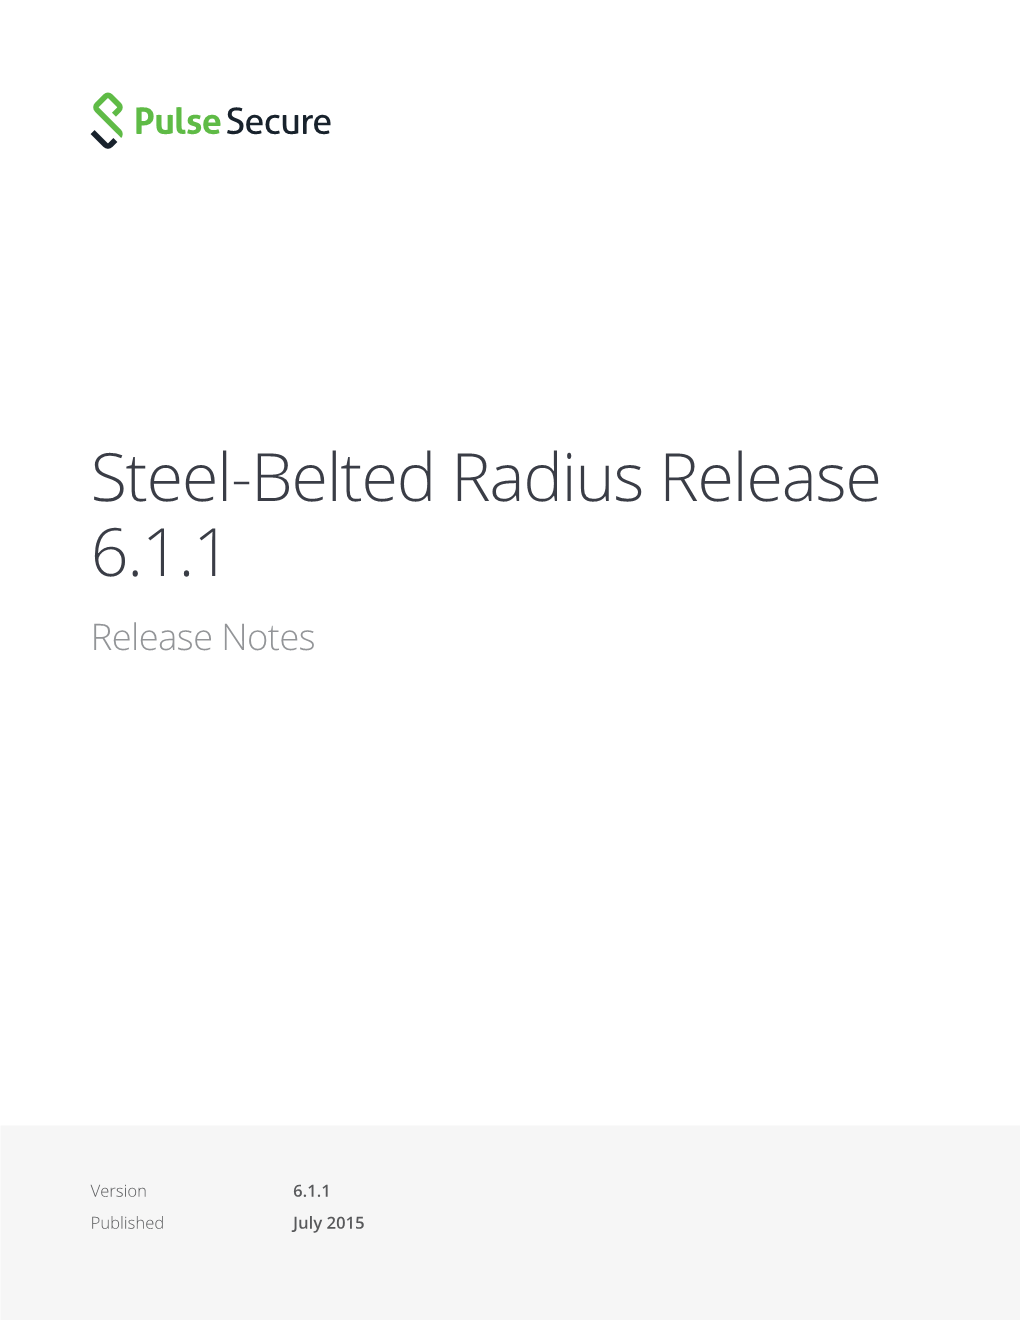 Steel-Belted Radius Release 6.1.1 Release Notes